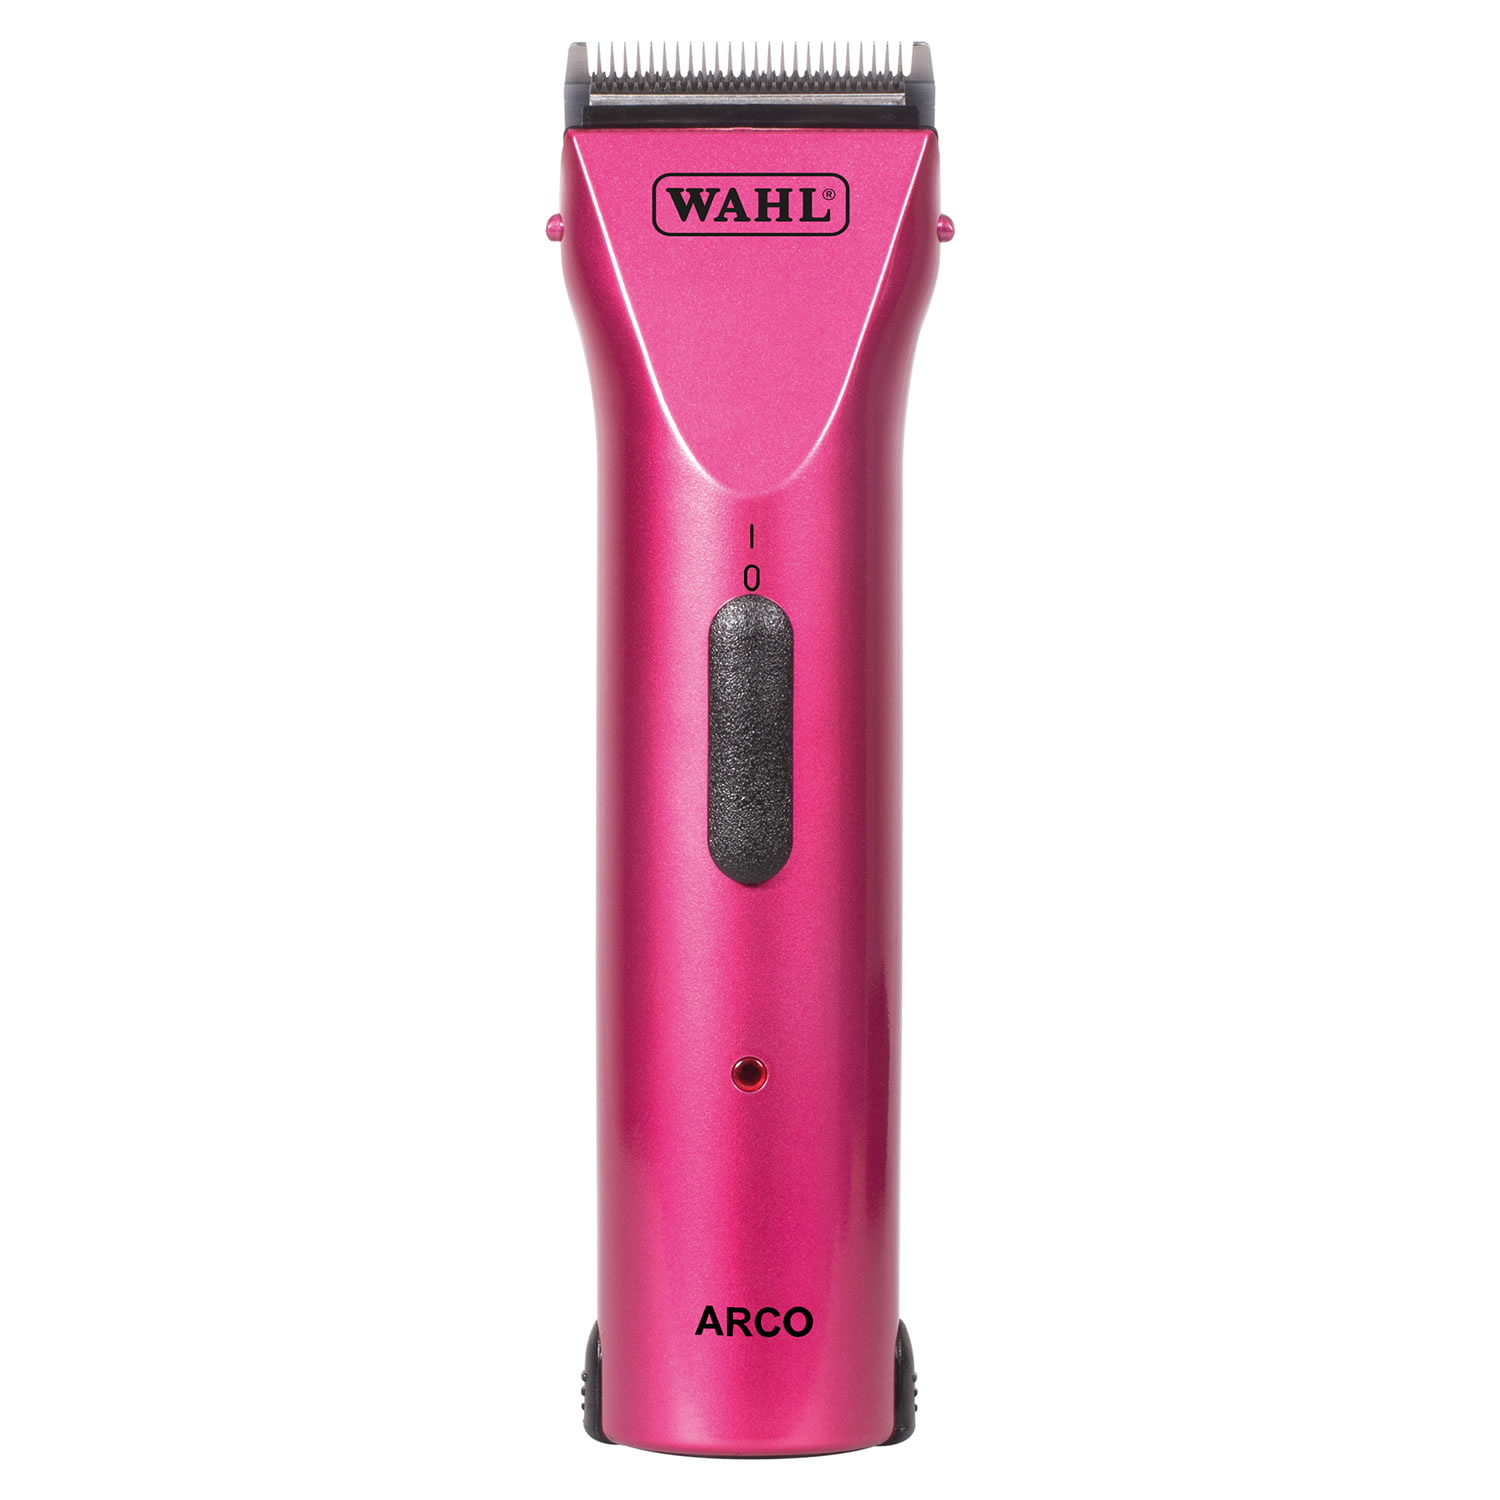 WAHL ARCO CLIPPER KIT